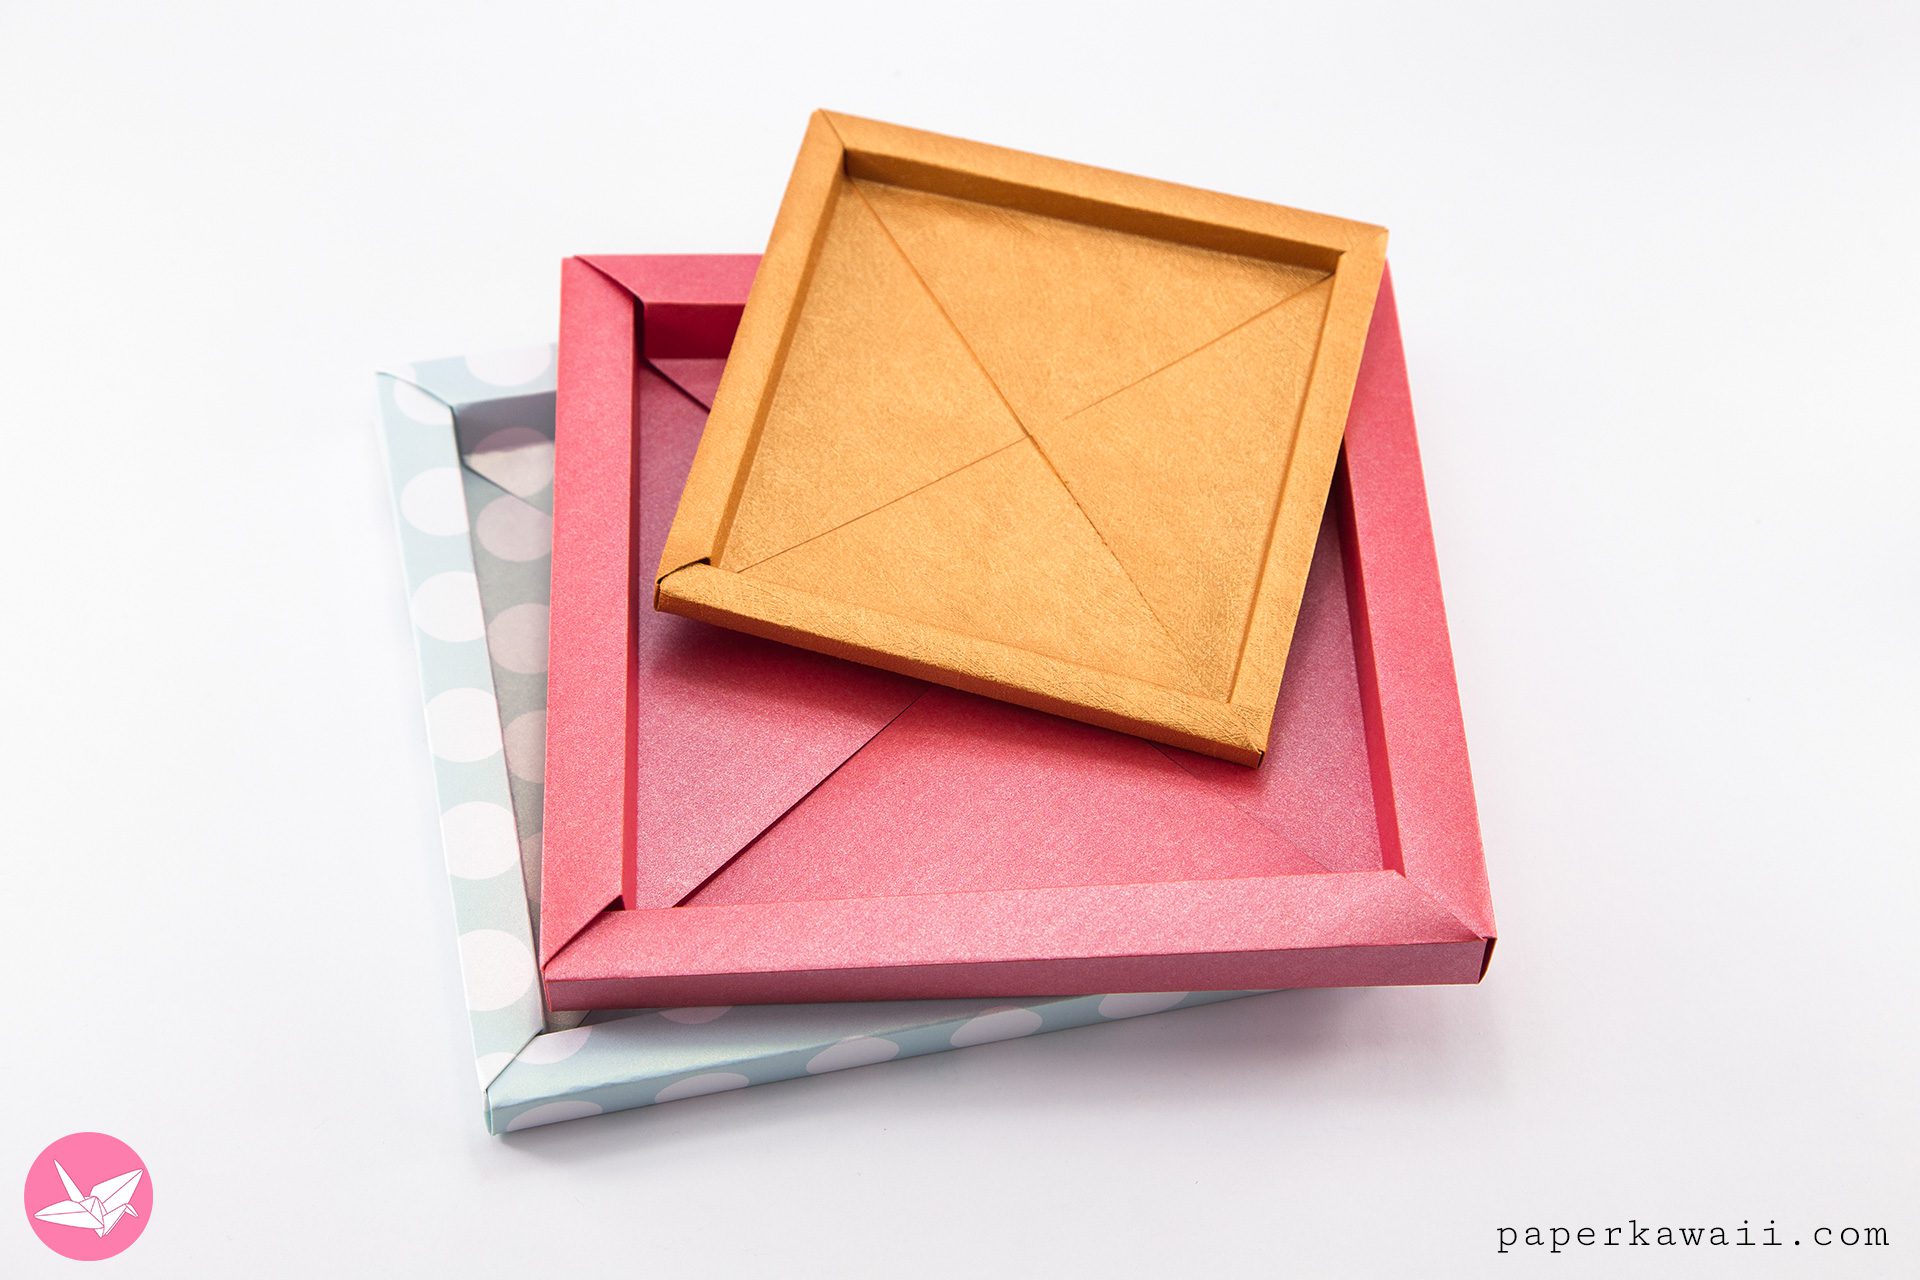 Learn how to make a 3d origami frame box can be used to display art, as a gift box or tray & it also makes a great origami paper storage box. No glue required.